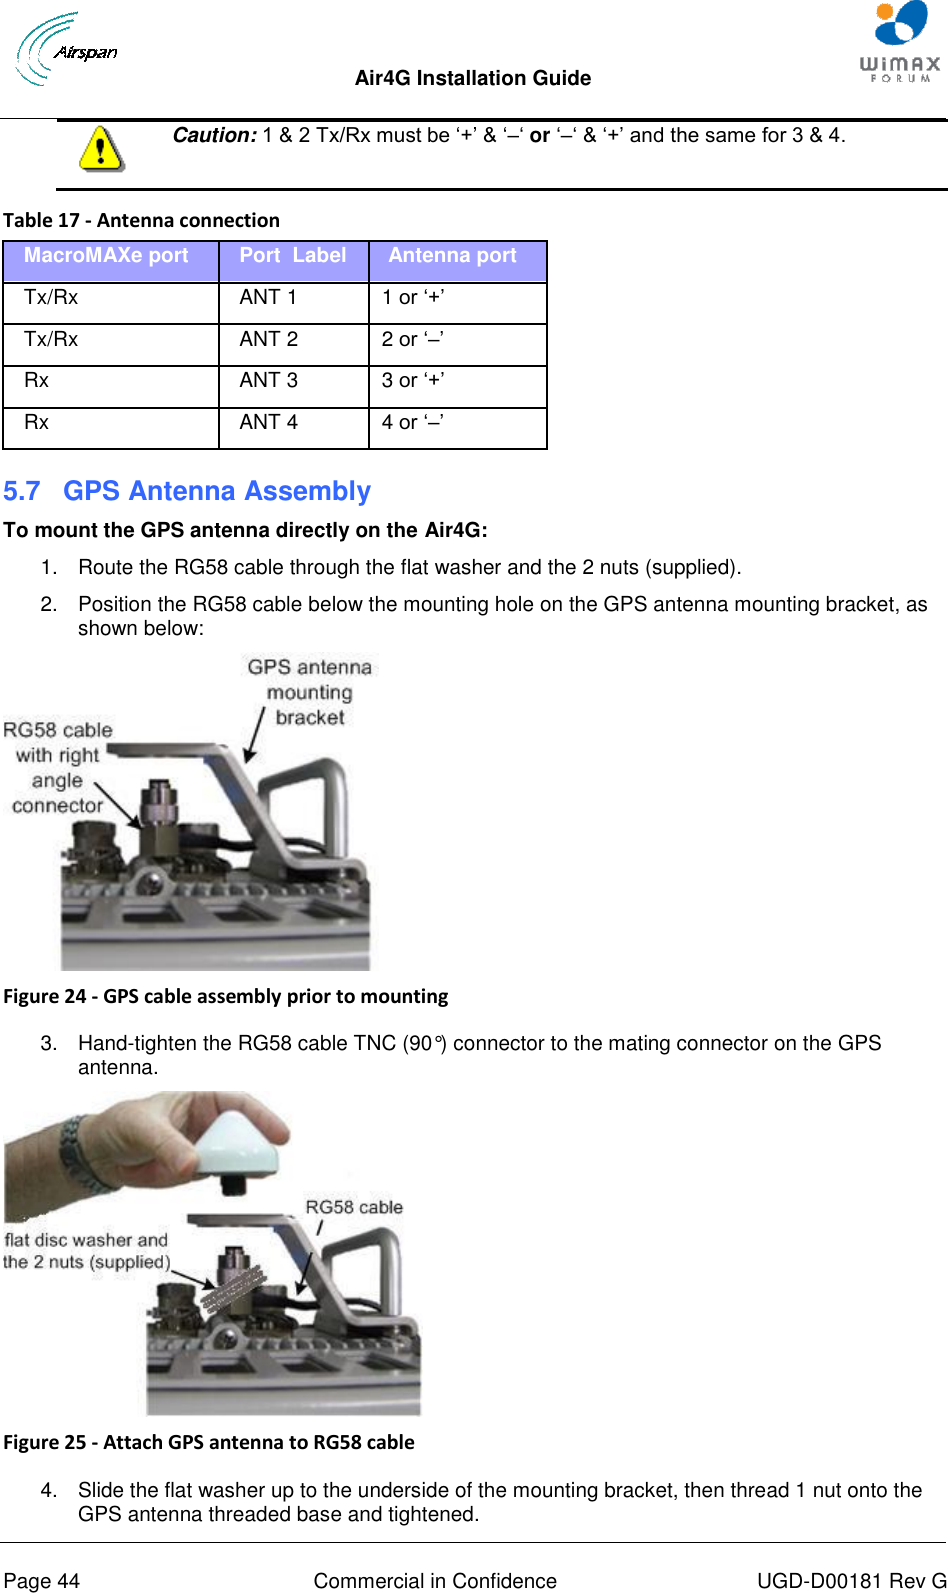  Air4G Installation Guide       Page 44  Commercial in Confidence  UGD-D00181 Rev G   Caution: 1 &amp; 2 Tx/Rx must be „+‟ &amp; „–„ or „–„ &amp; „+‟ and the same for 3 &amp; 4.  Table 17 - Antenna connection MacroMAXe port Port  Label    Antenna port Tx/Rx ANT 1    1 or „+‟ Tx/Rx ANT 2    2 or „–‟ Rx ANT 3    3 or „+‟ Rx ANT 4    4 or „–‟ 5.7  GPS Antenna Assembly To mount the GPS antenna directly on the Air4G: 1.  Route the RG58 cable through the flat washer and the 2 nuts (supplied). 2.  Position the RG58 cable below the mounting hole on the GPS antenna mounting bracket, as shown below:  Figure 24 - GPS cable assembly prior to mounting  3.  Hand-tighten the RG58 cable TNC (90°) connector to the mating connector on the GPS antenna.  Figure 25 - Attach GPS antenna to RG58 cable  4.  Slide the flat washer up to the underside of the mounting bracket, then thread 1 nut onto the GPS antenna threaded base and tightened. 